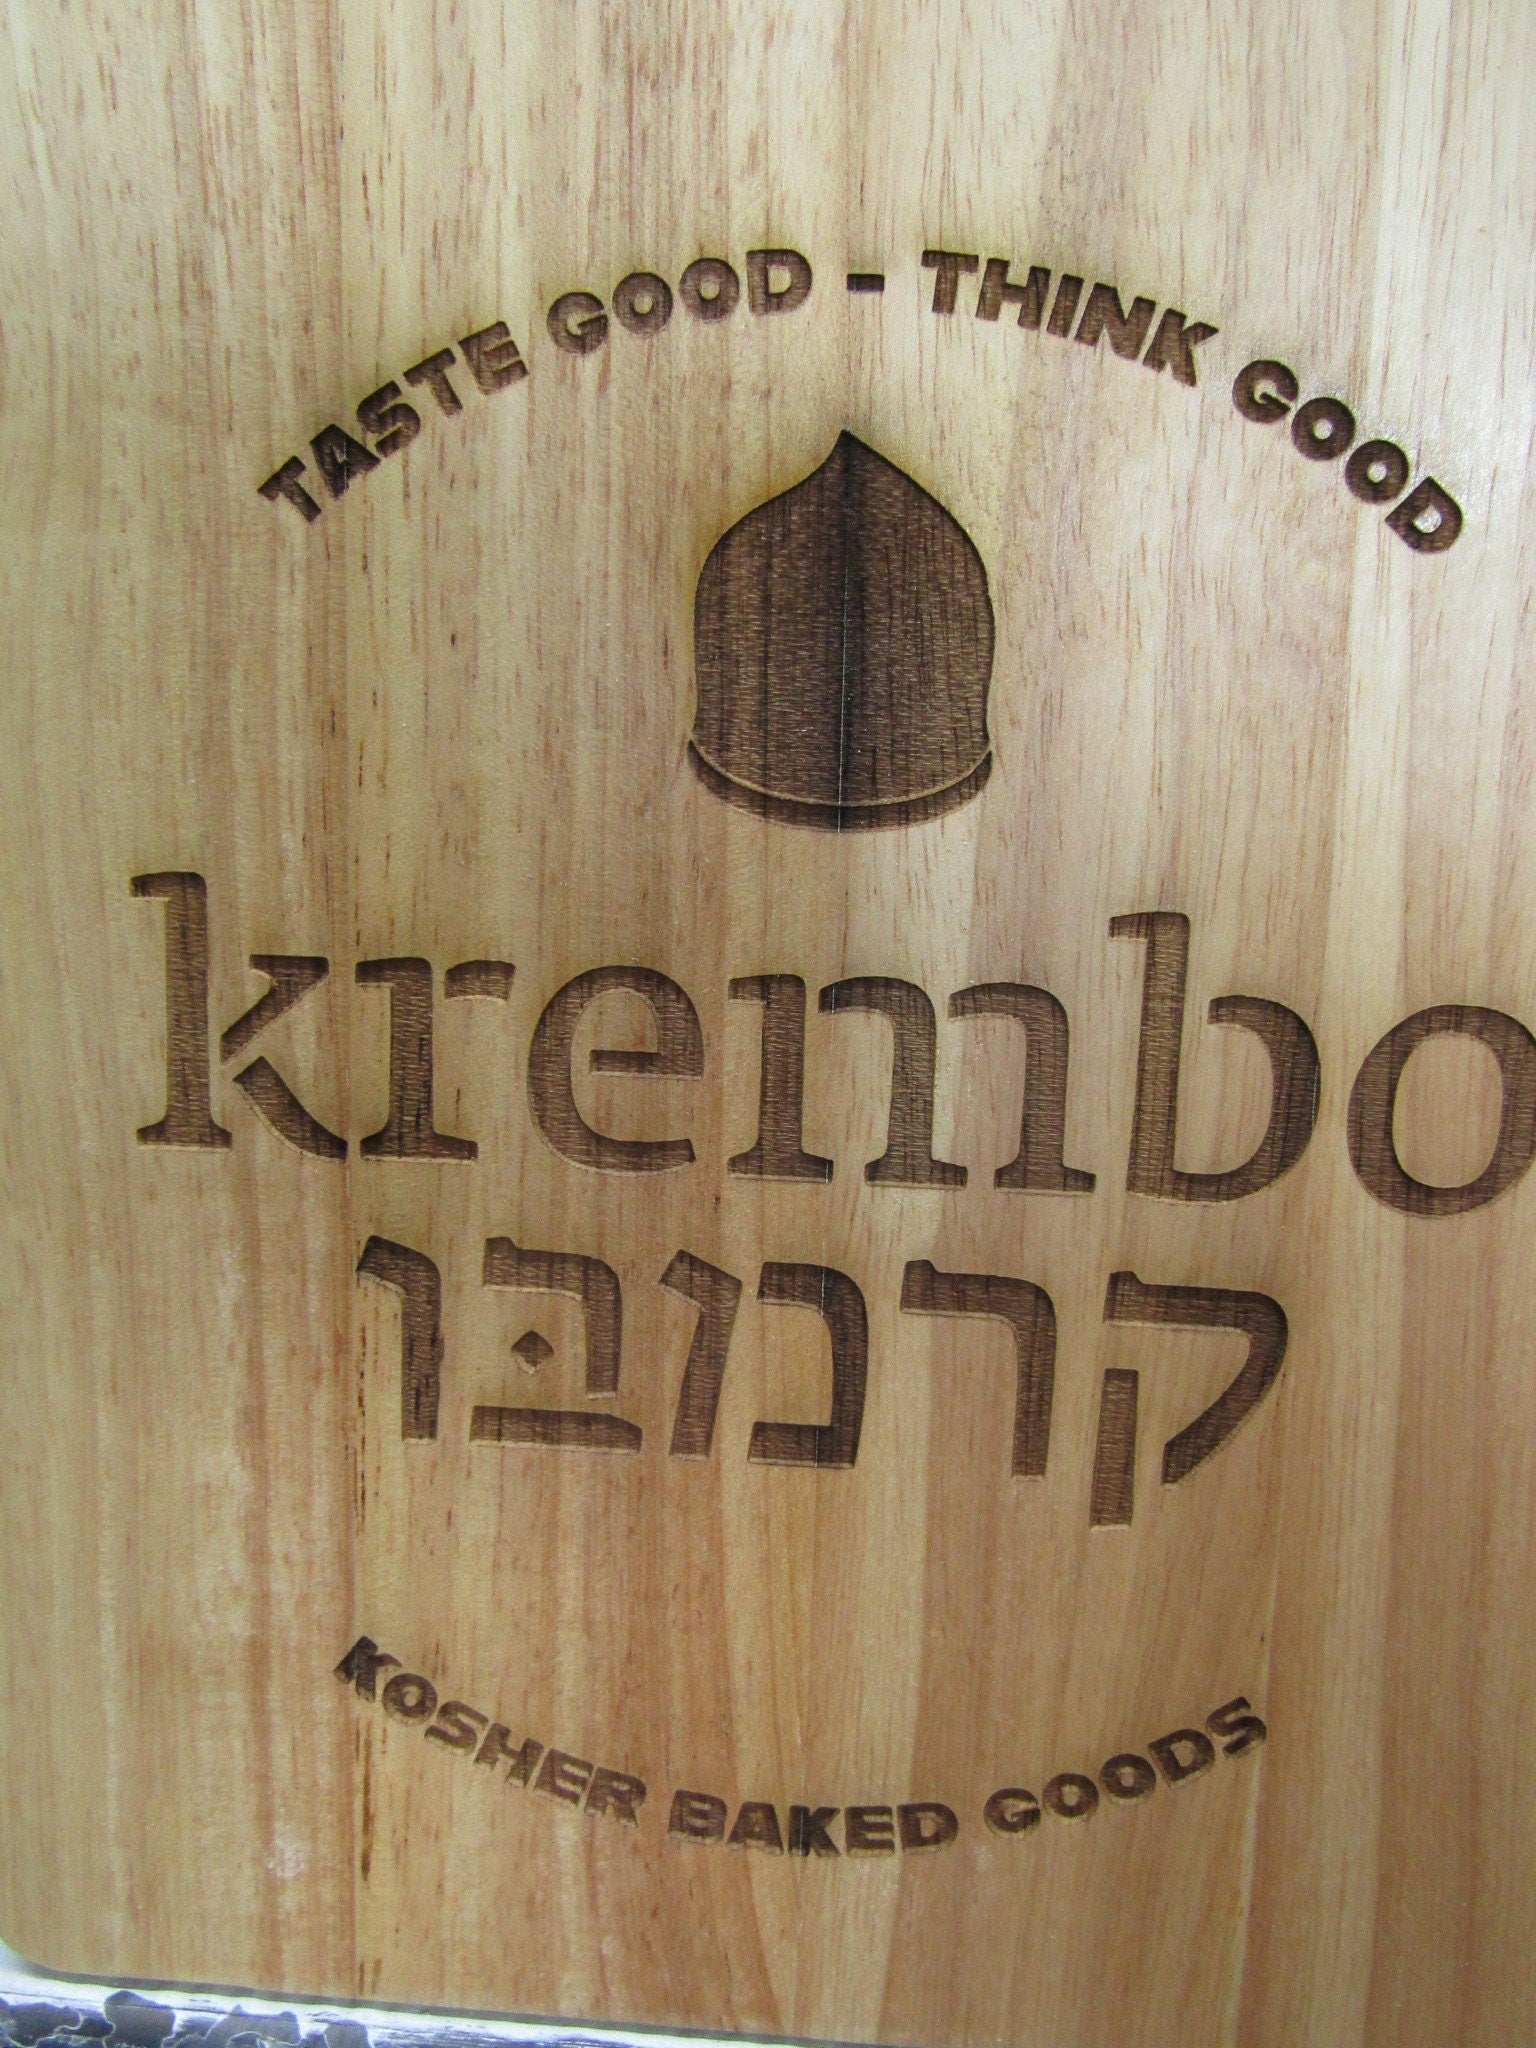 Custom Wooden Engraved Cutting Board Kosher Baked Goods Good Taste Logo Your Image Business Personalized Bamboo Bakery Etched